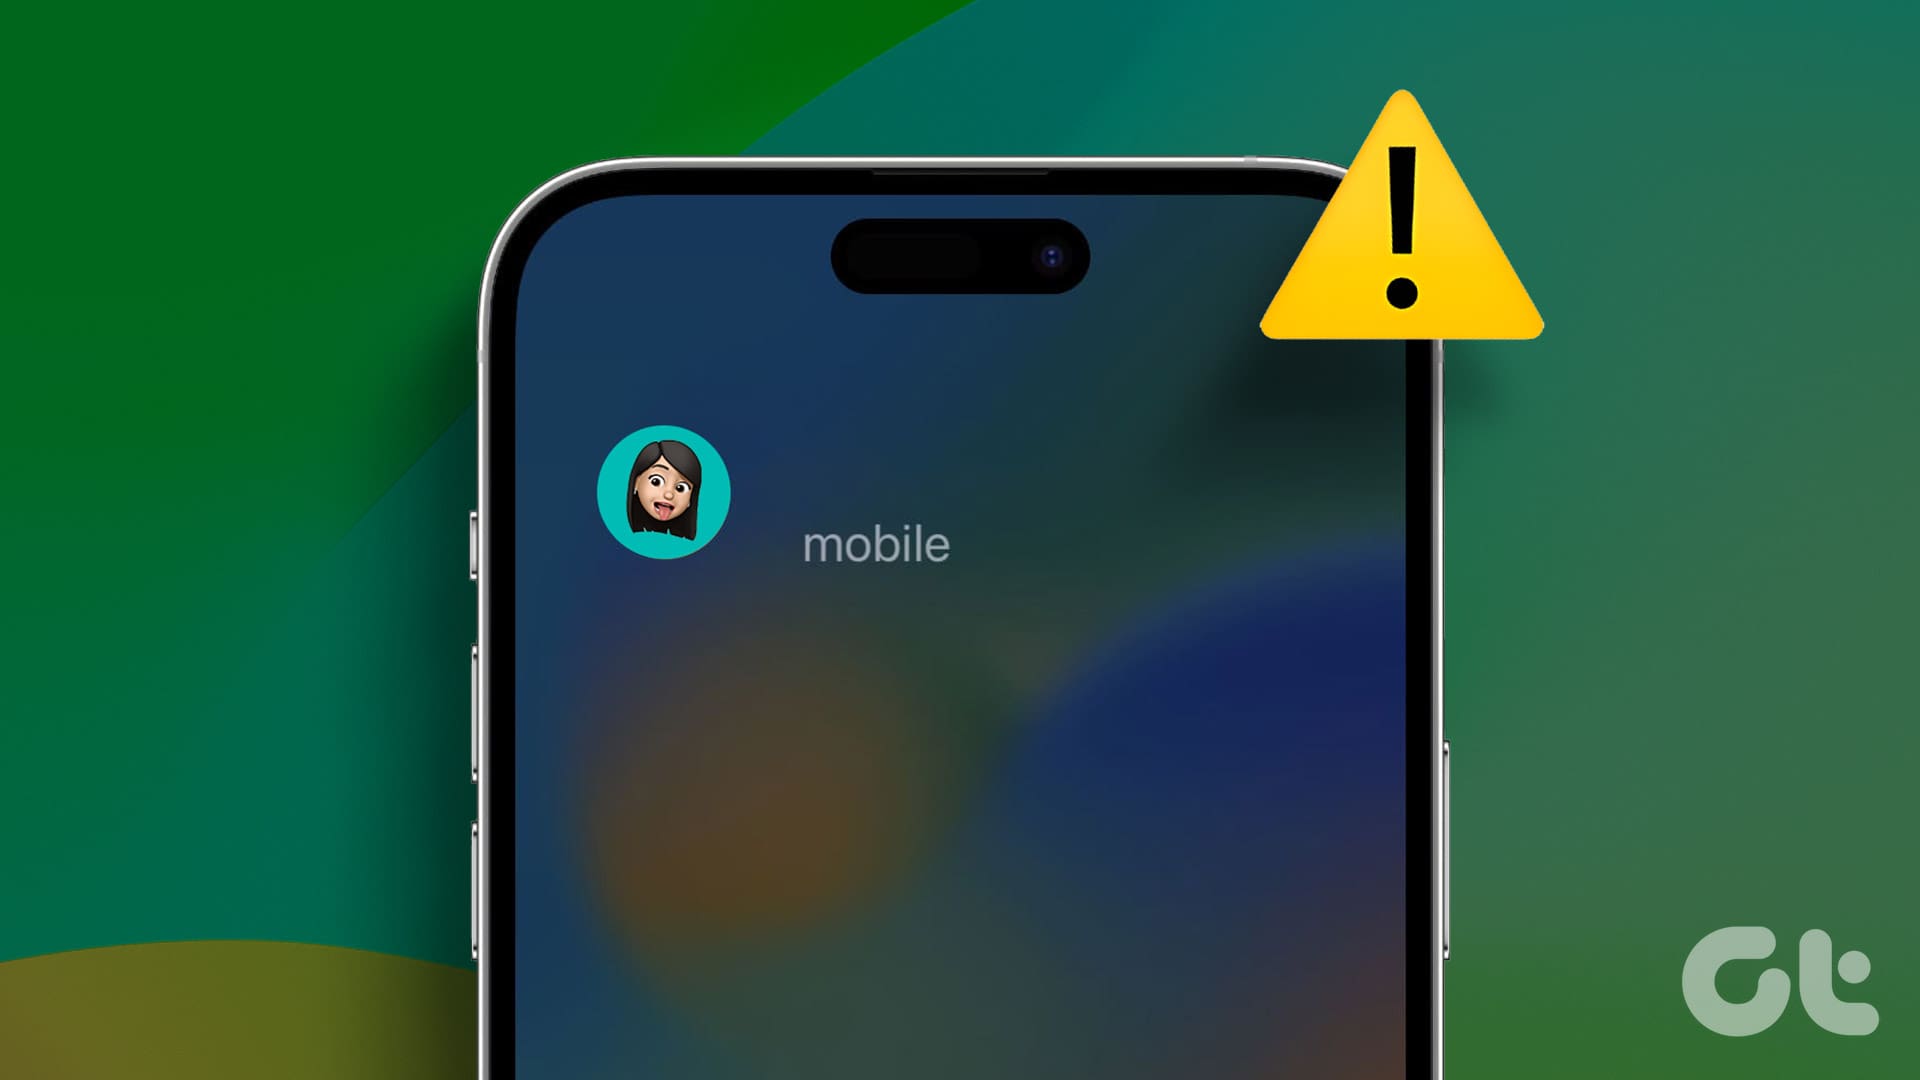 Top Fixes for iPhone Not Showing Contact Names for Incoming Calls